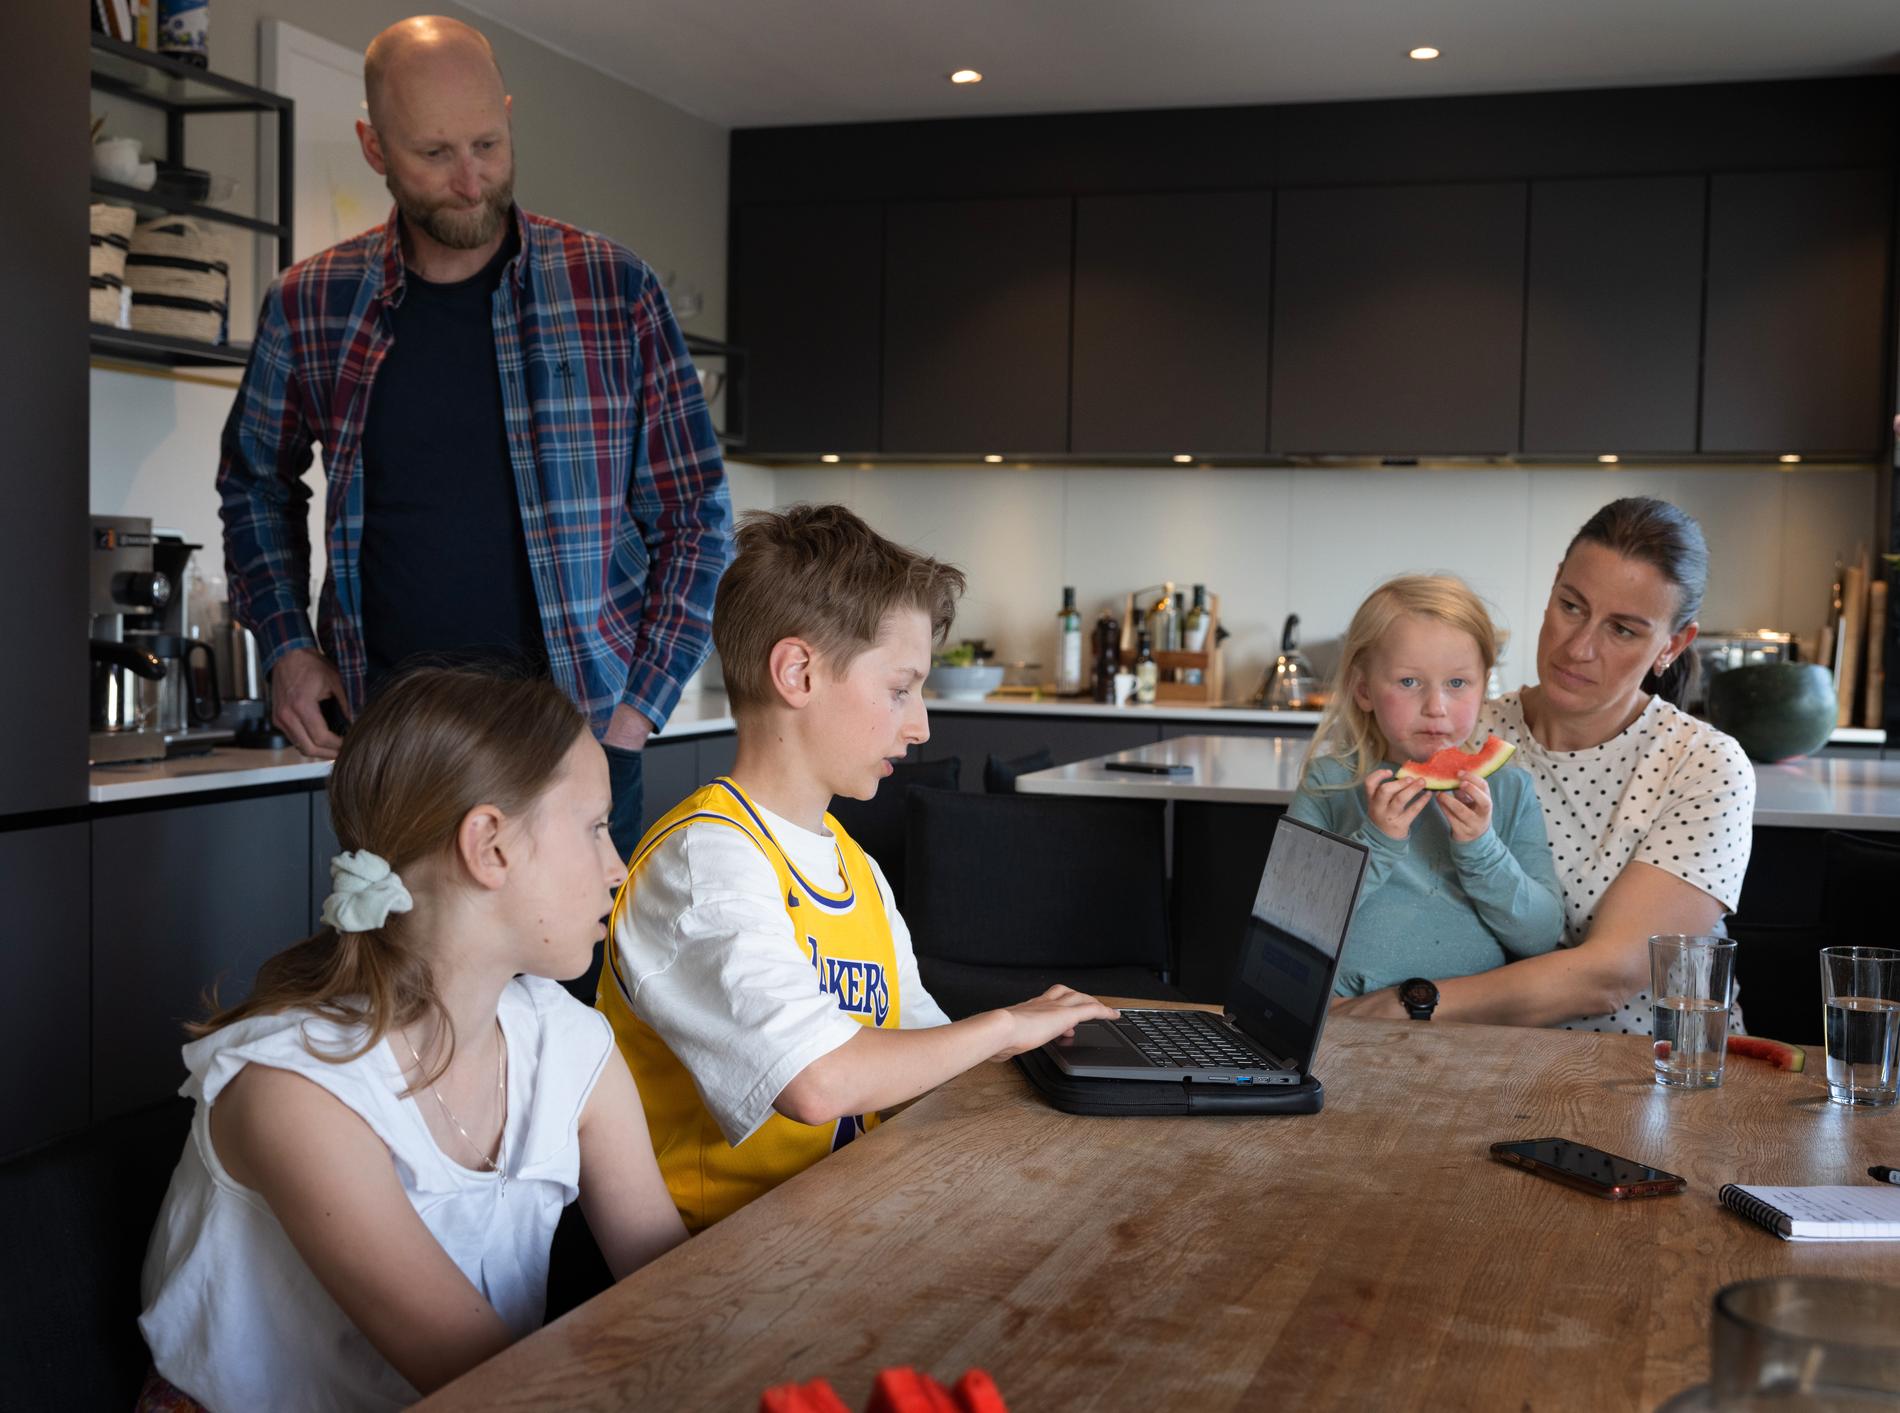 Parents are worried: Henrik, 11, spends several hours in front of a screen every day